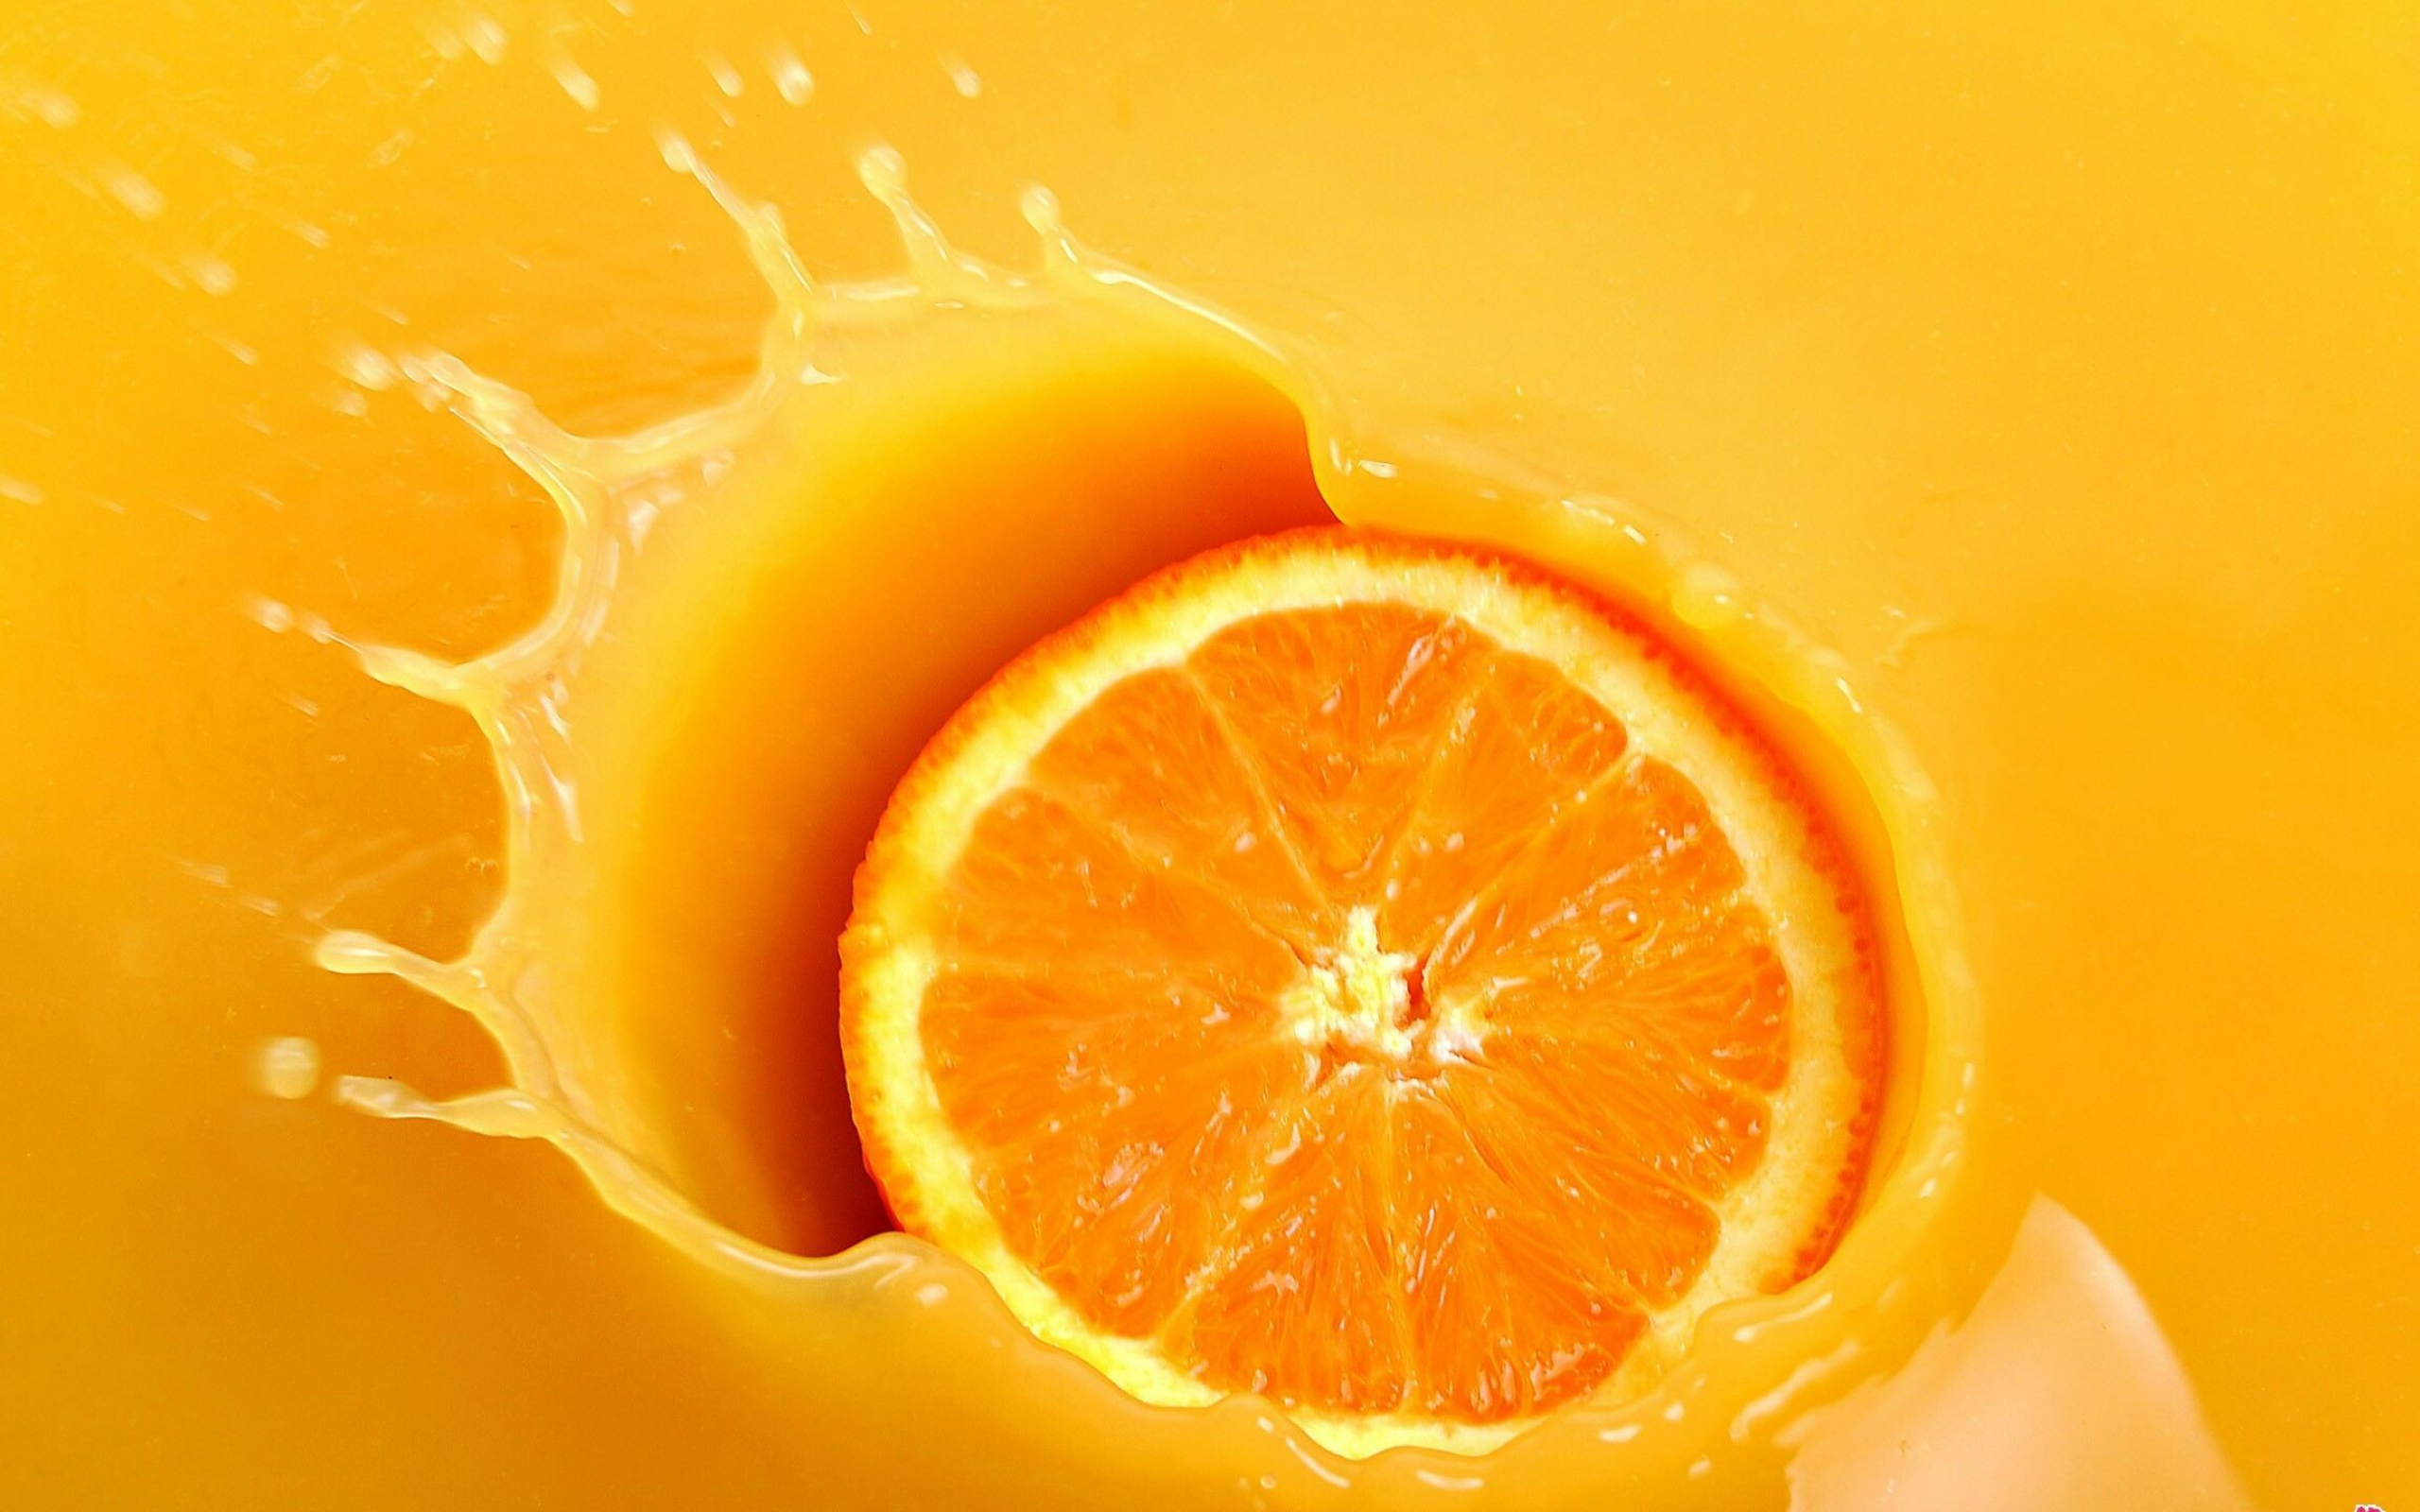 Fruit: Orange, One of the most consumed fruits in the world. 2560x1600 HD Wallpaper.